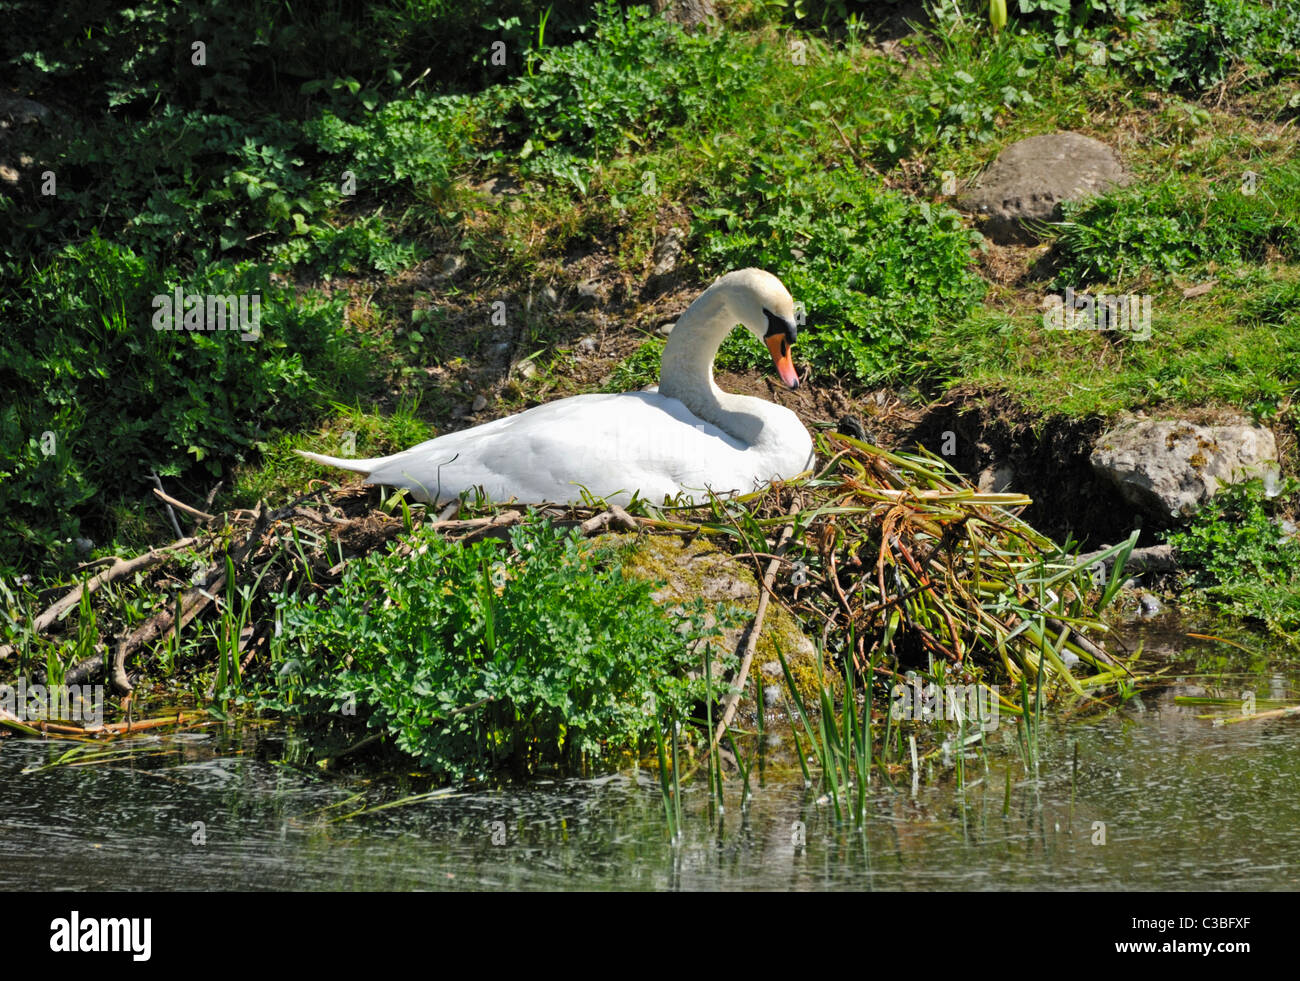 Mute swan nesting on the Northern Reach of the Lancaster to Kendal canal. Tewitfield, Cumbria, England, United Kingdom, Europe. Stock Photo